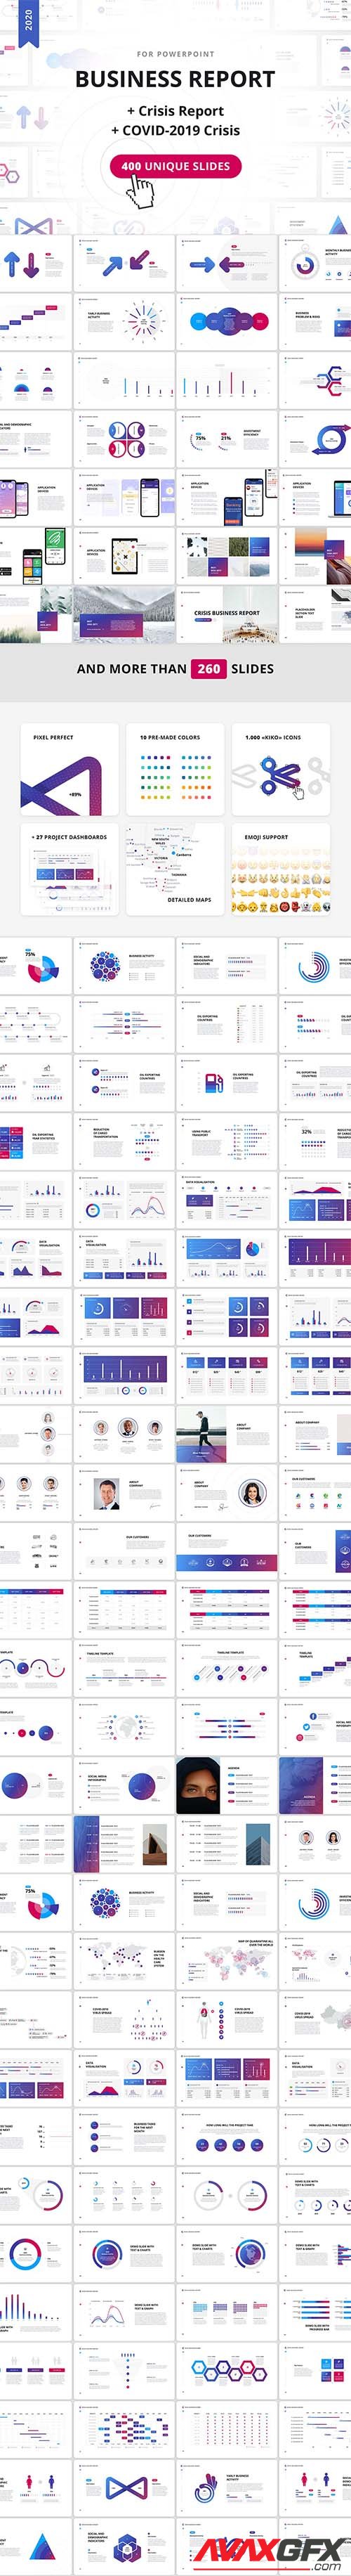 Business Report 2020 for PowerPoint, Keynote, Google Slides